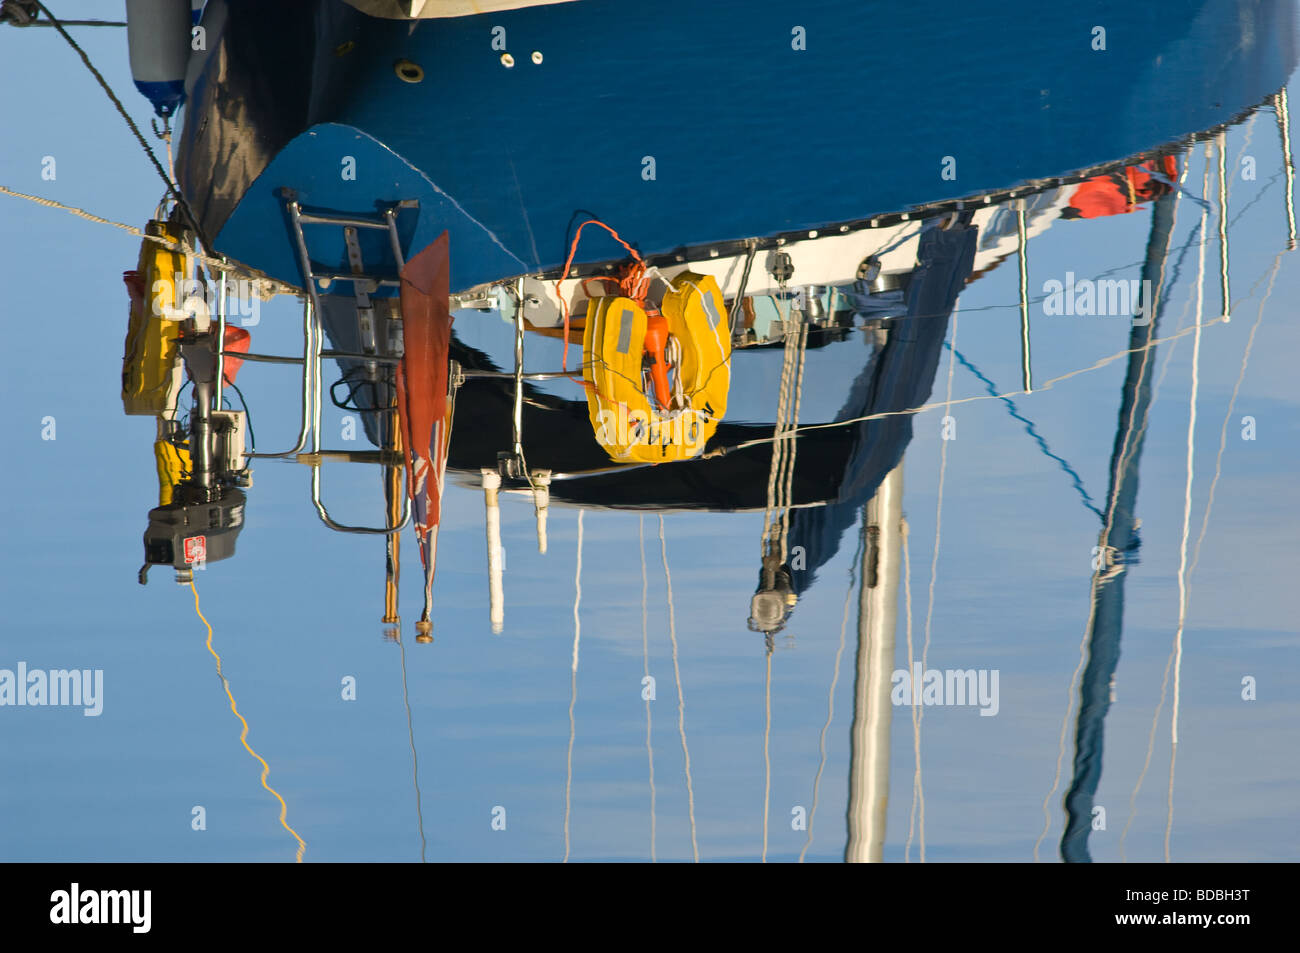 Reflection in a still lake of the rigging of a sailing boat. Stock Photo